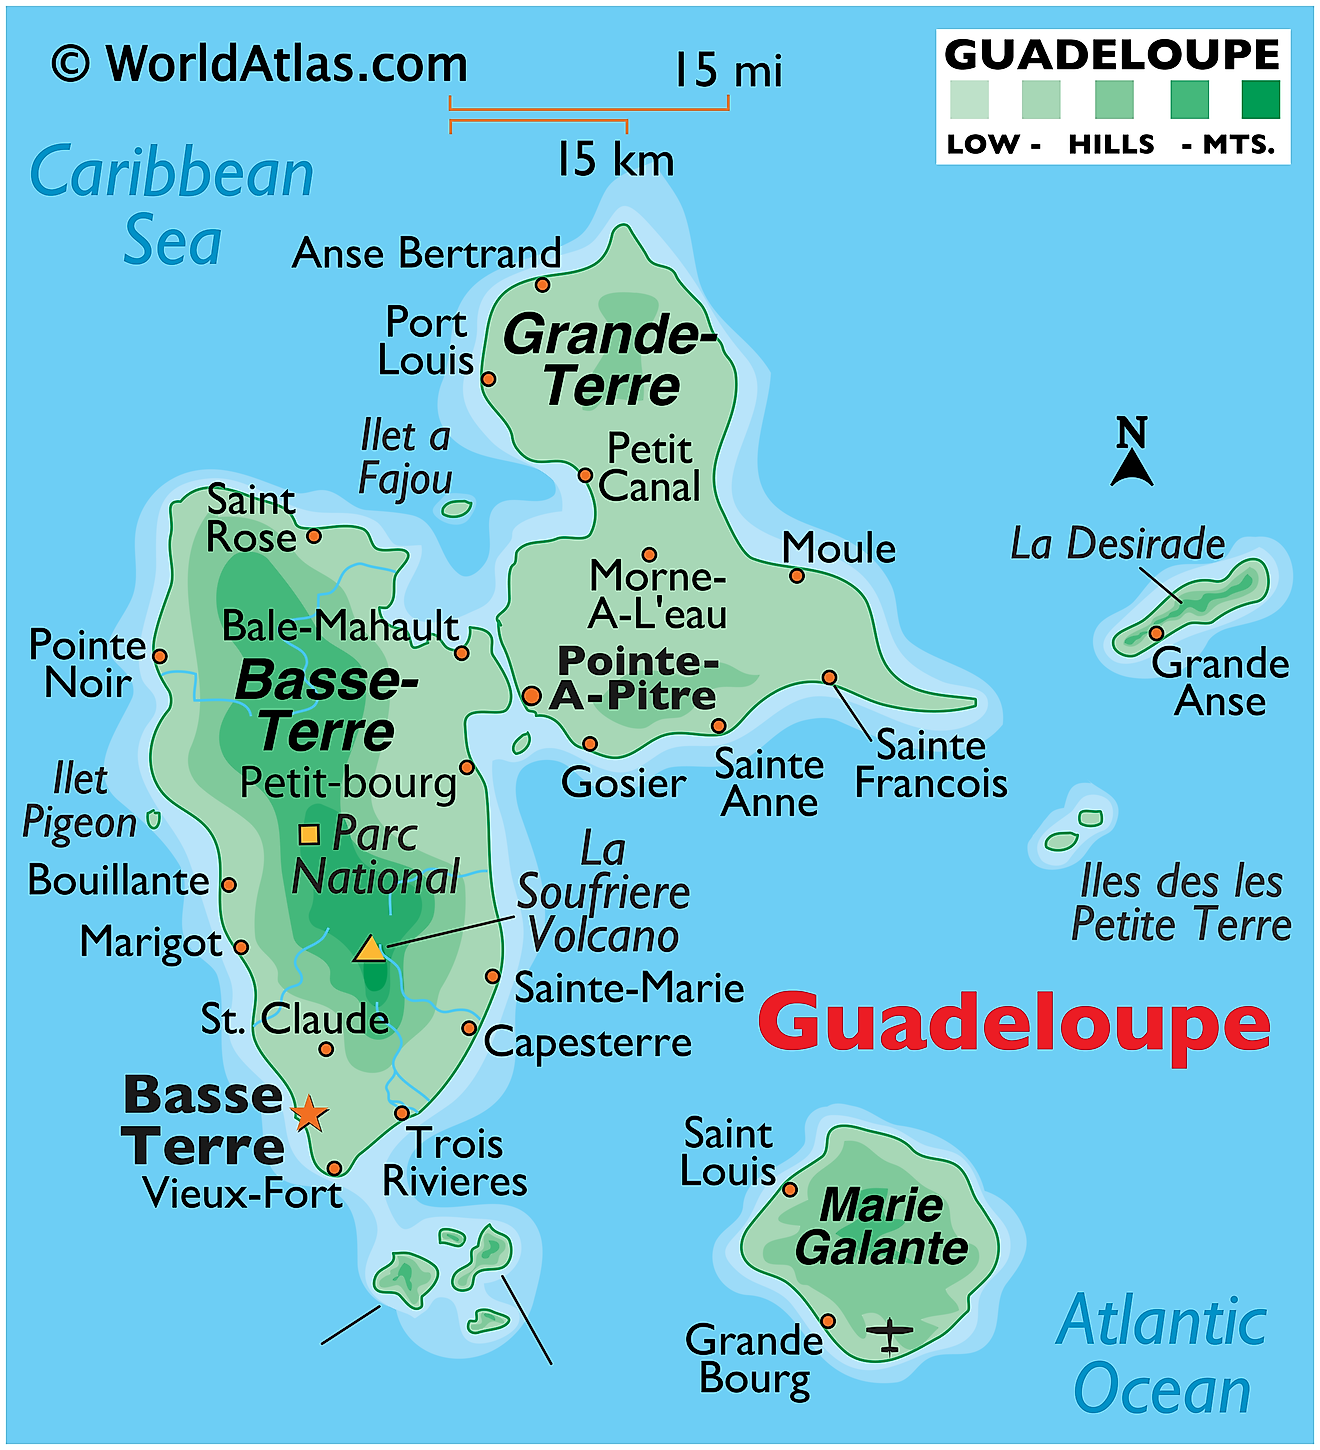 Physical map of Guadeloupe showing terrain, major islands, national parks, important settlements, volcanoes, etc.